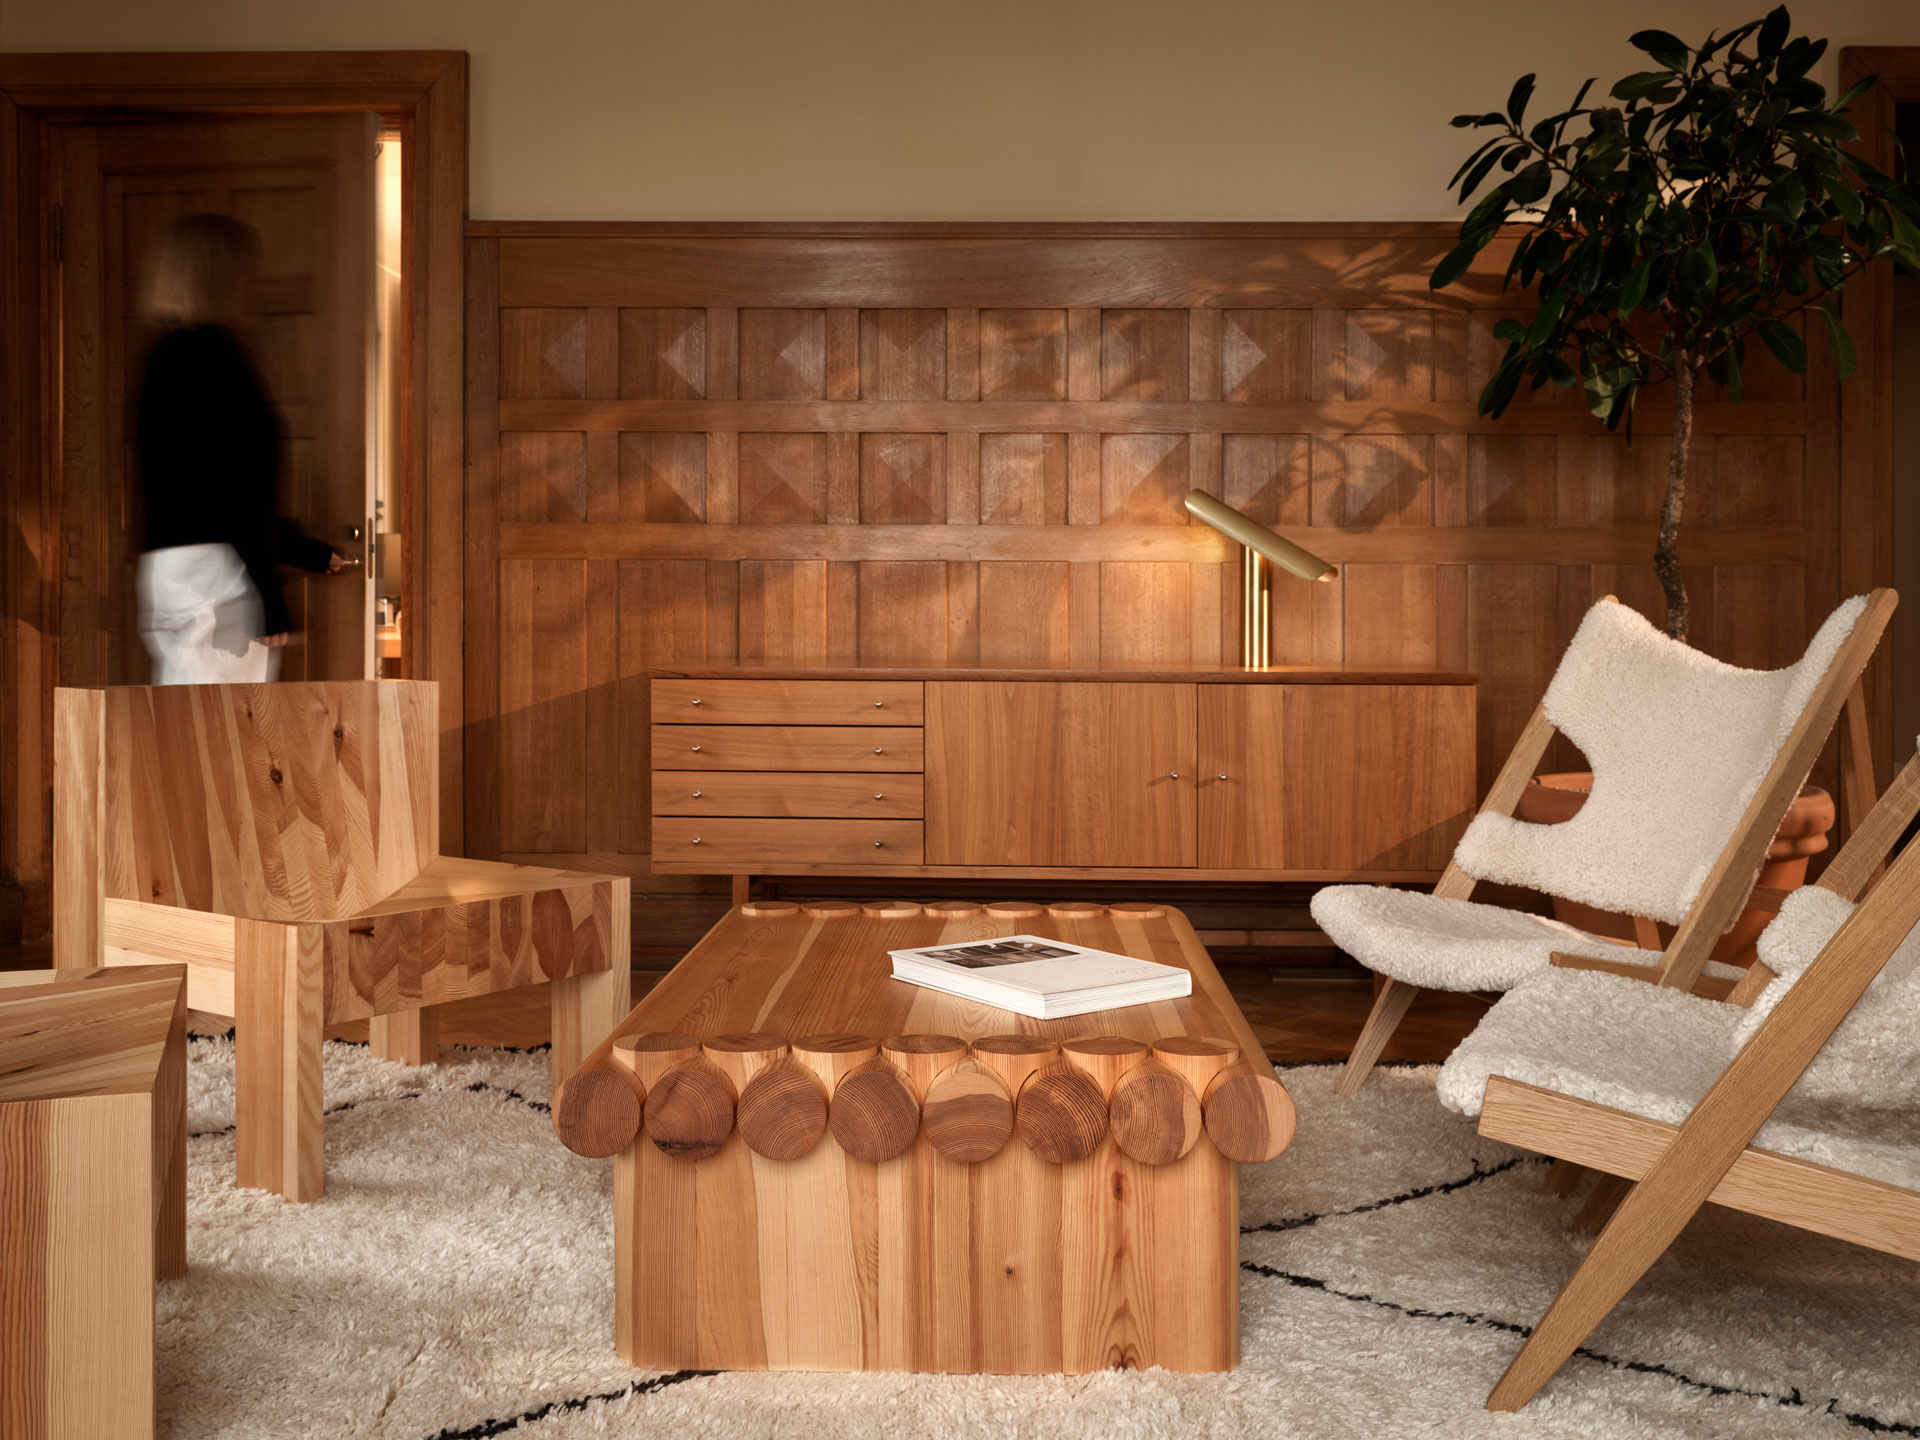 local wooden Finnish furniture from solid wood, two lounge chairs with white upholstery, wooden cabinet storage and wooden panel in the background, warm atmosphere